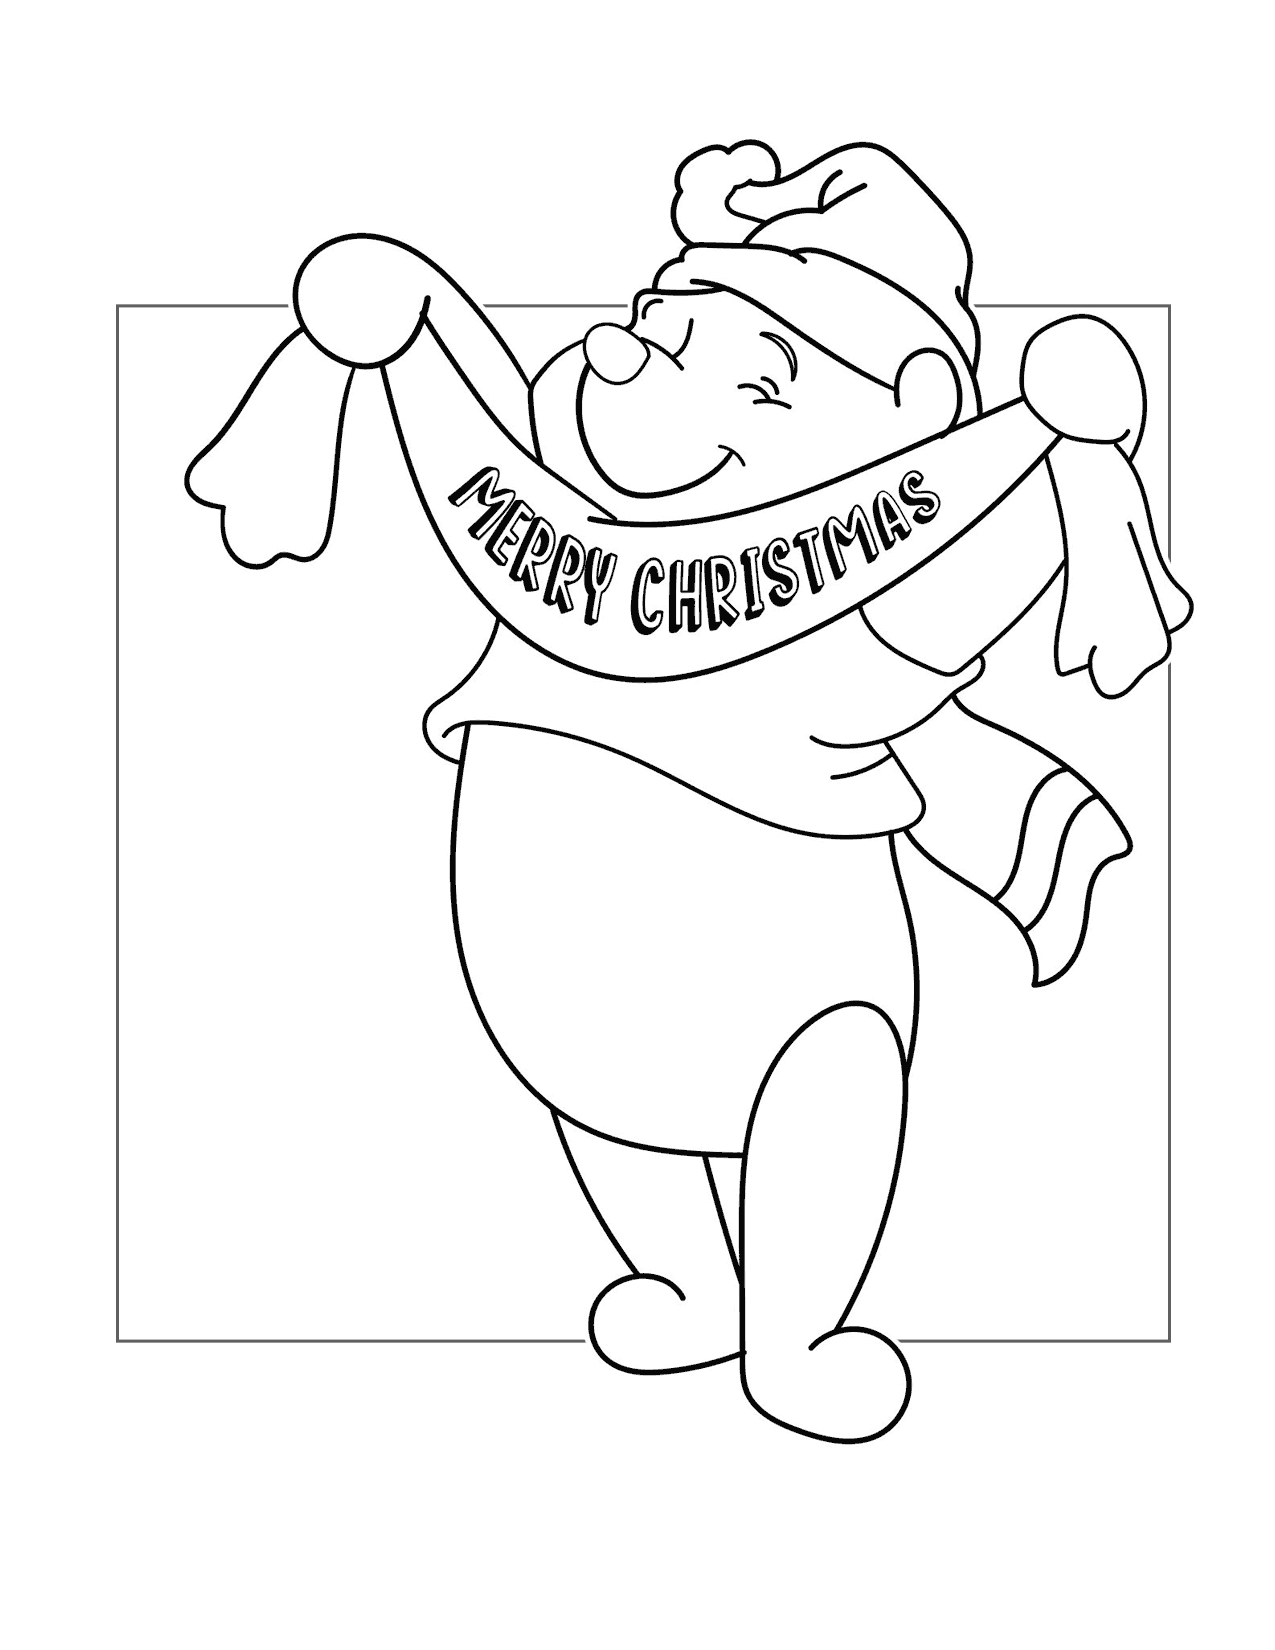 Merry Christmas Pooh Bear Coloring Page